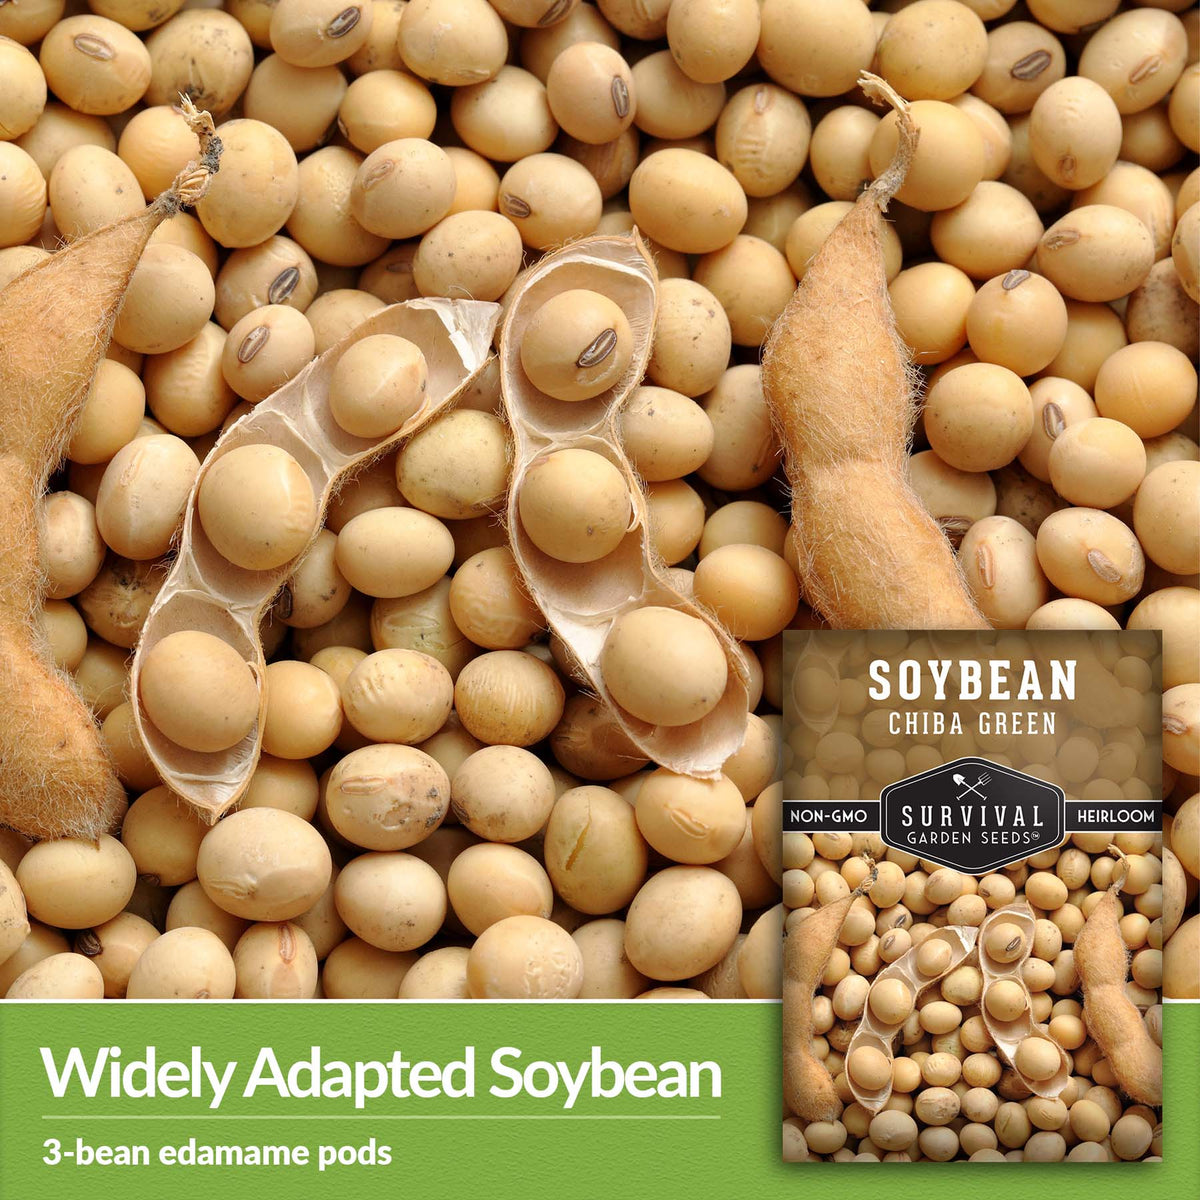 Chiba Green is a widely adapted soybean